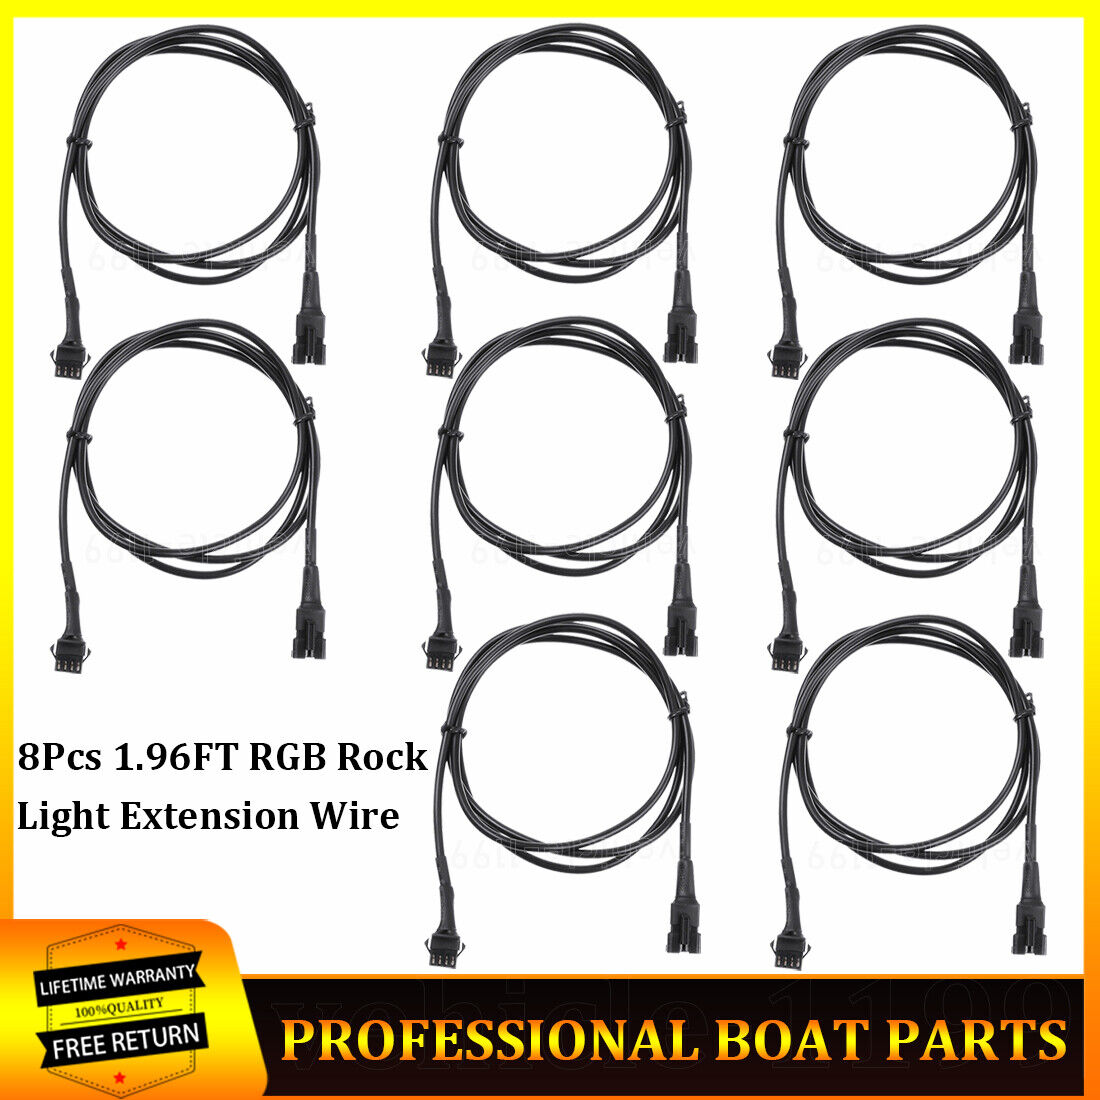 8x 4Pin 2ft Wiring Harness Extension Cord For RGB Underbody LED Strip Rock Light